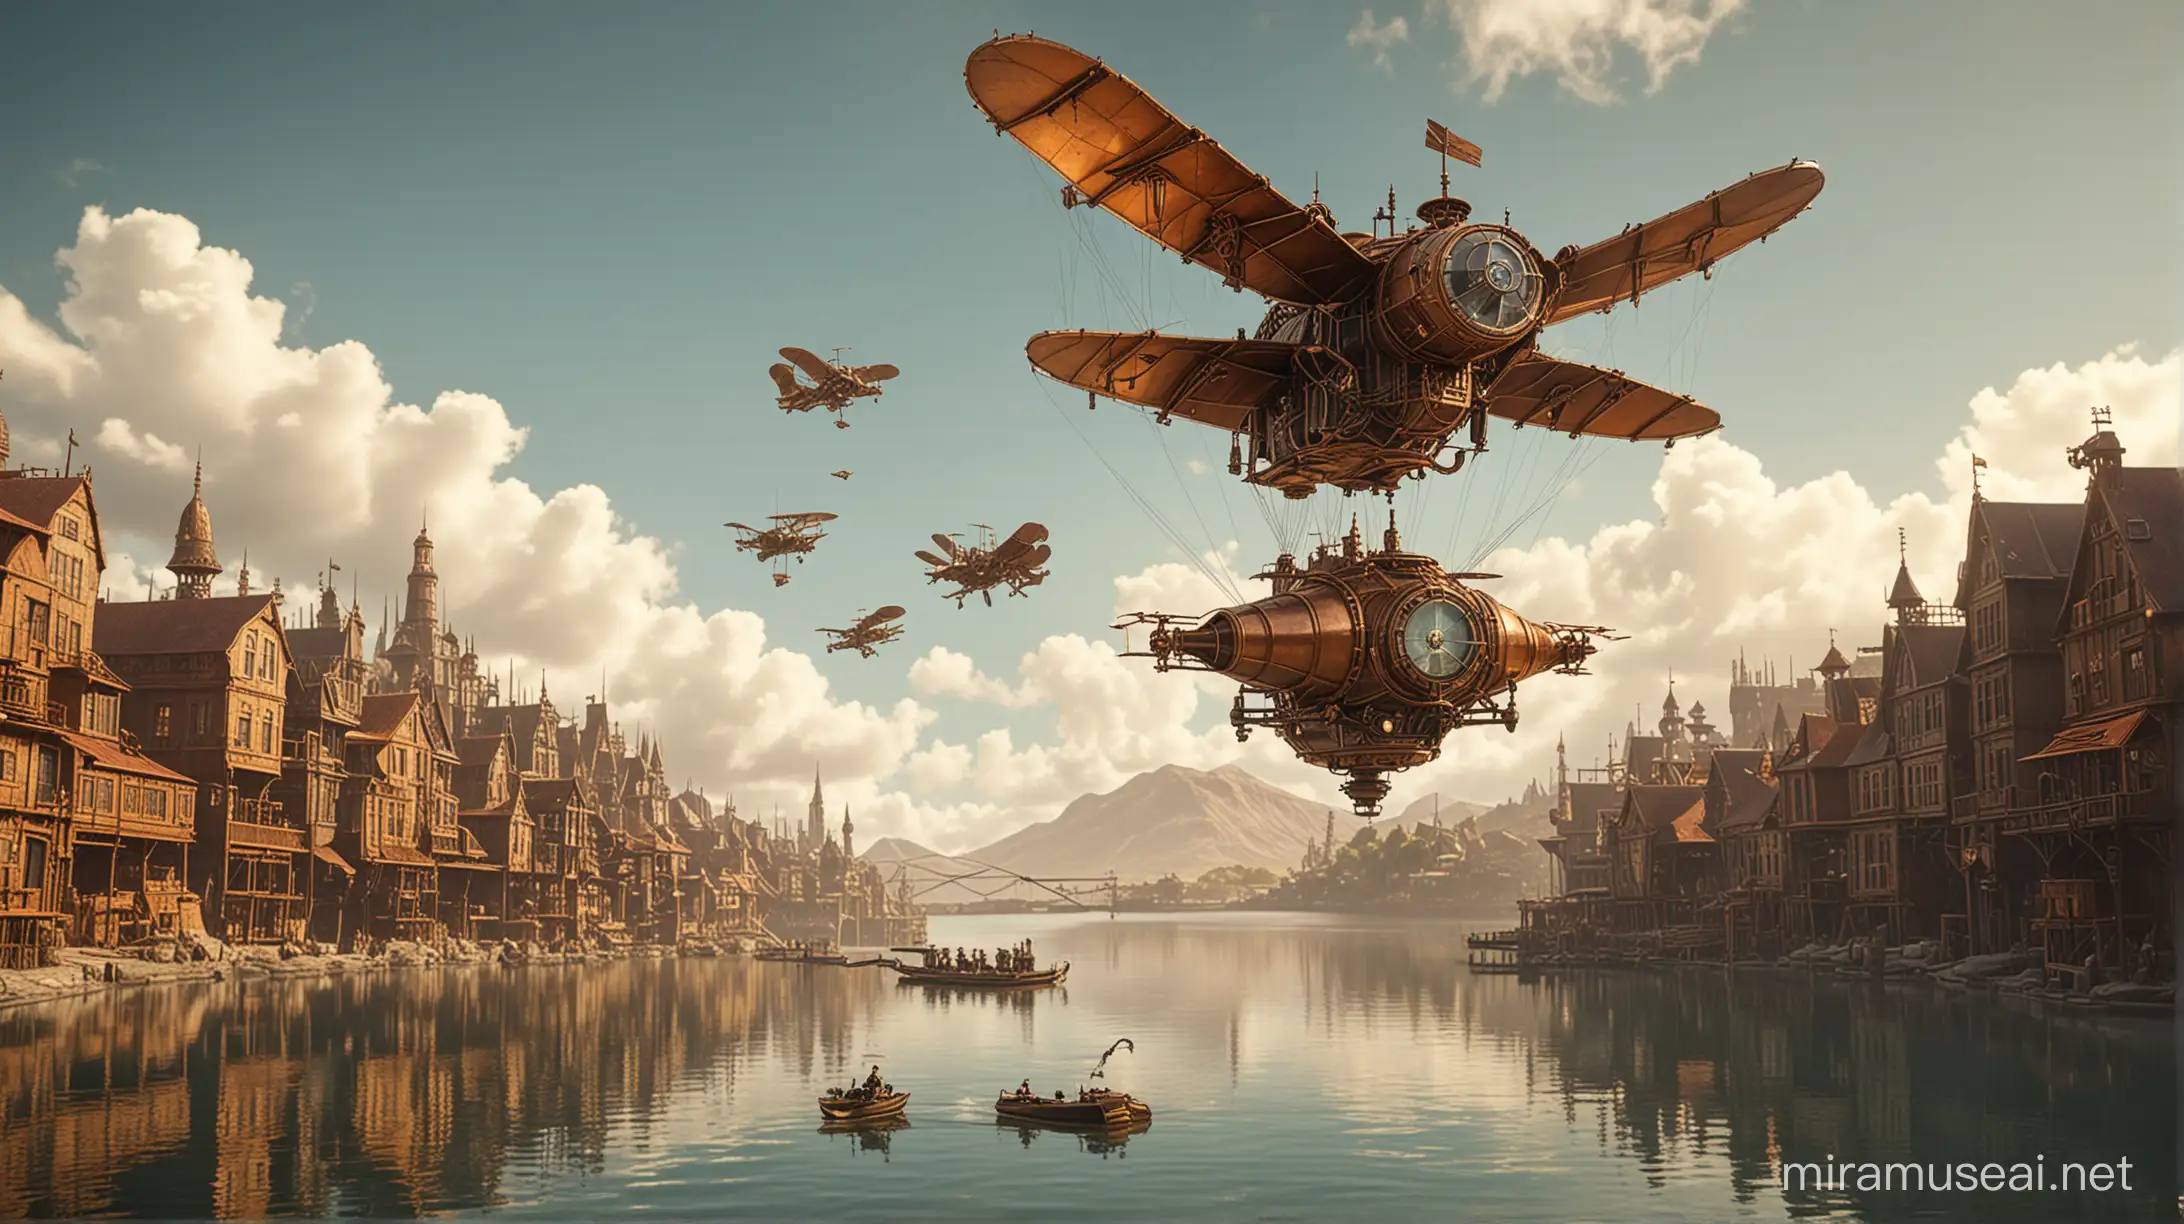 Steampunk Ornithopter Soaring Above Copper and Gold Isle